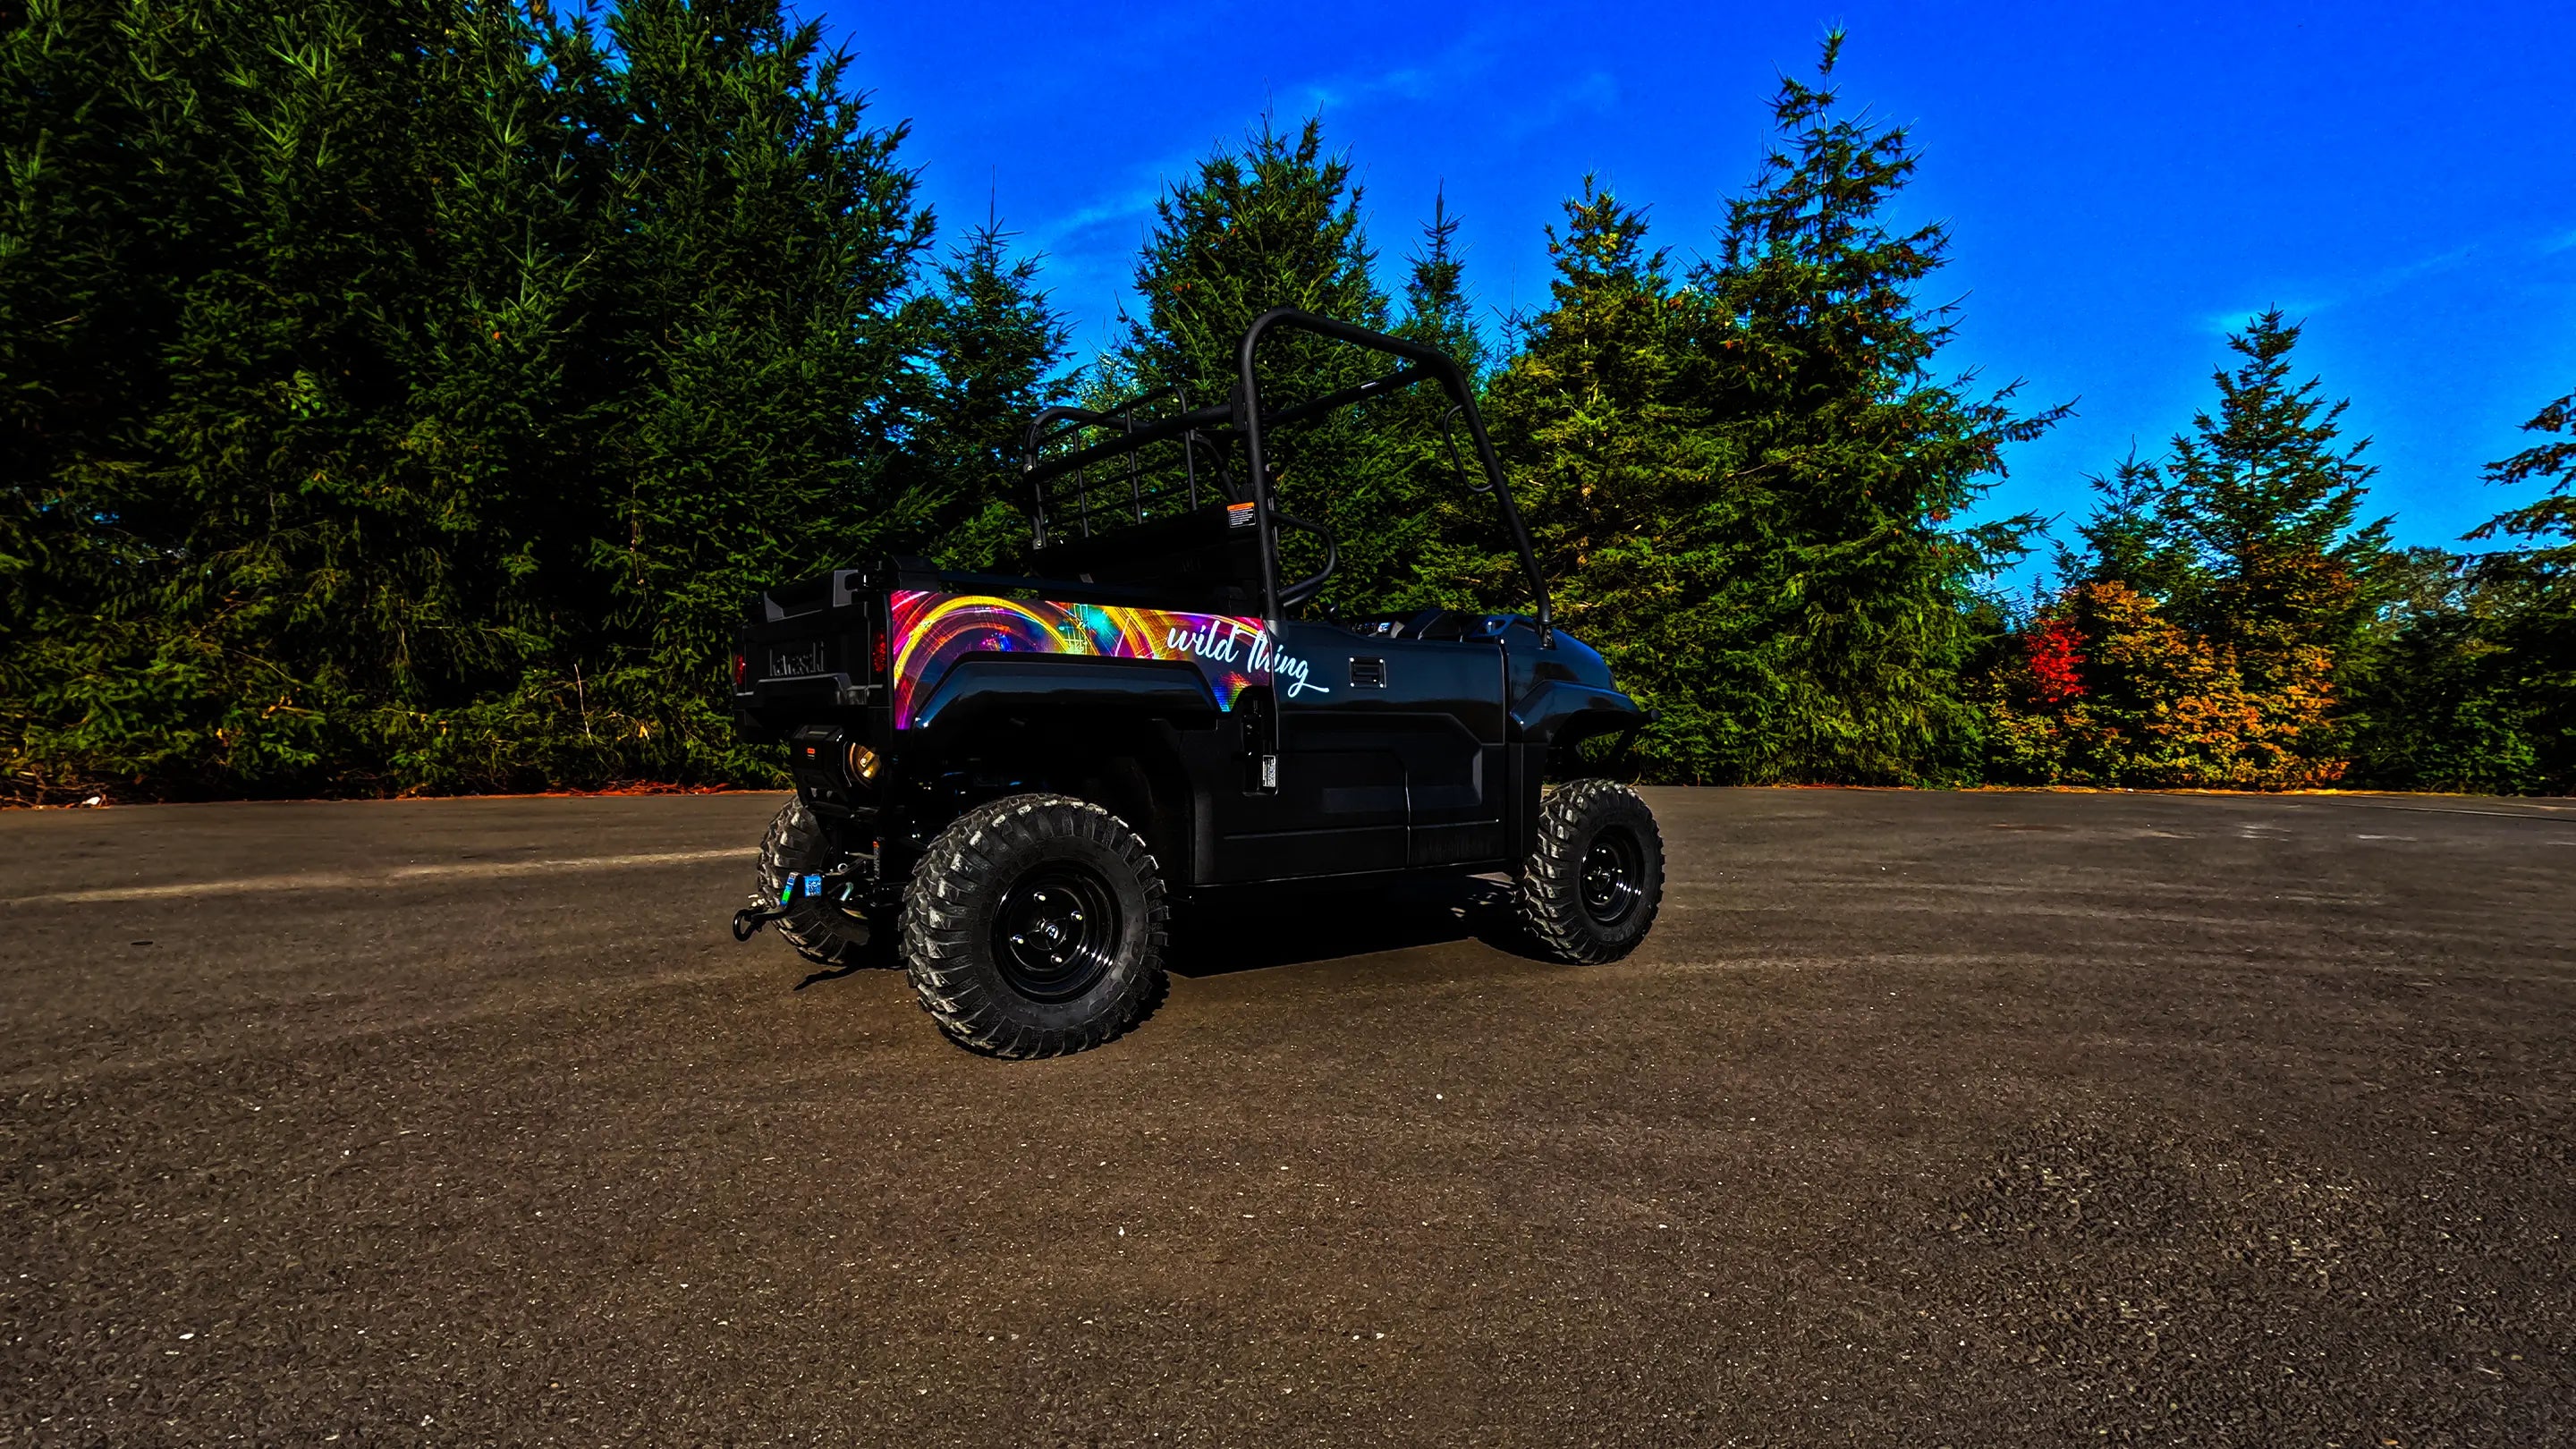 Half wrap we did on a Polaris RZR all graphics were printed on 3M vinyl and installed by an ARDOR Printing installer.